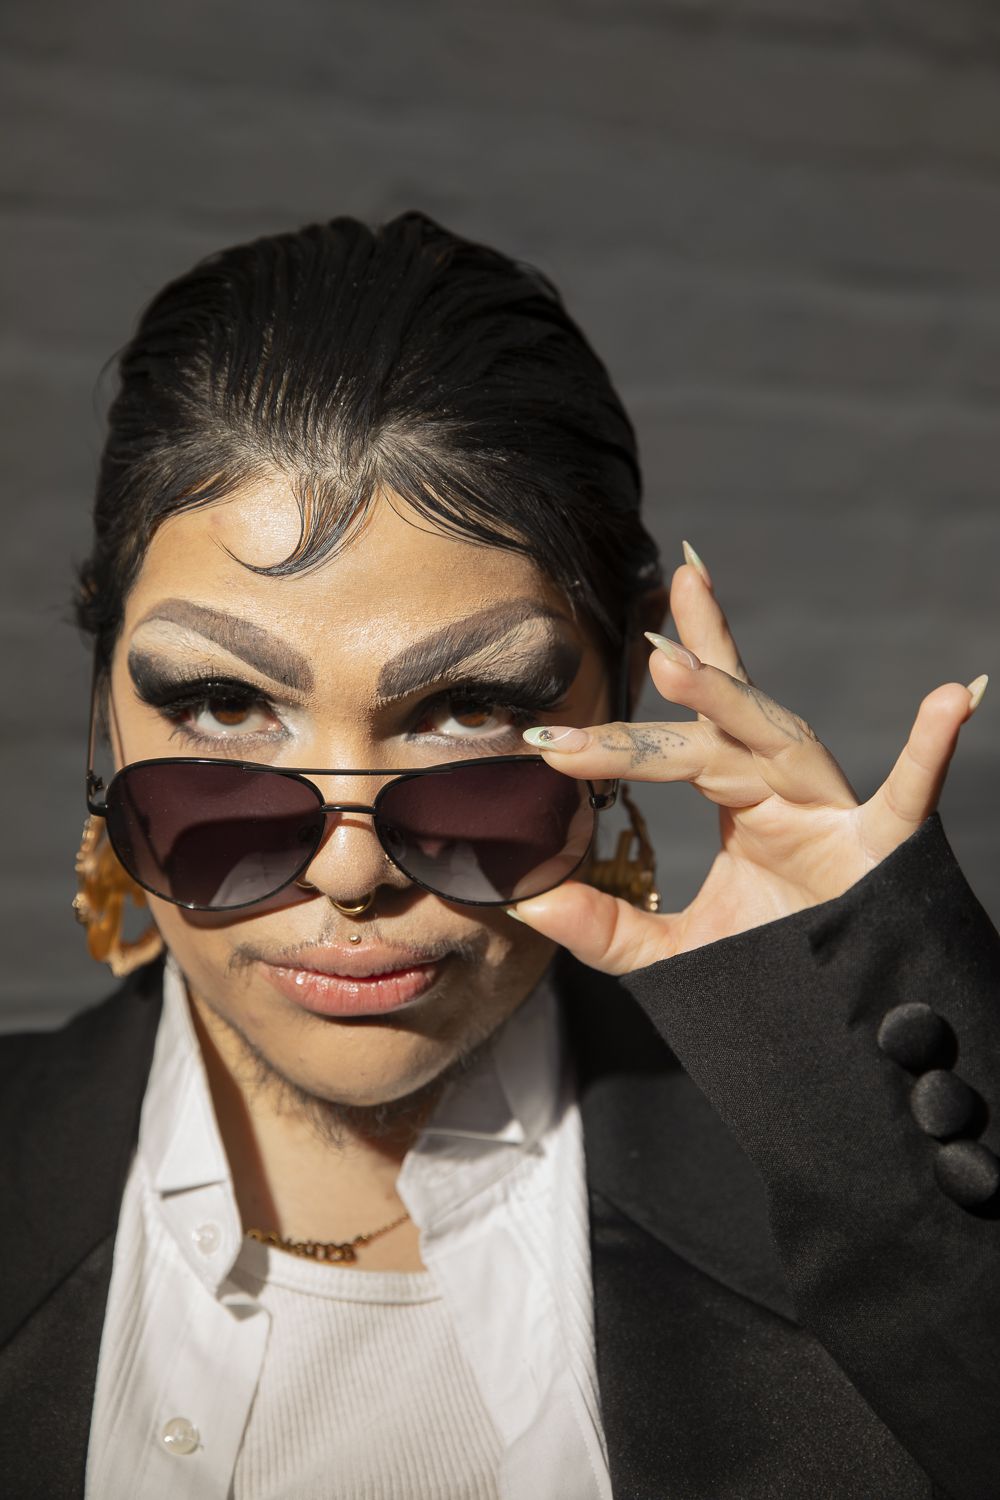 Closeup of a performer with sparse mustache and beard and long nails lowering aviator sunglasses and glancing at the viewer